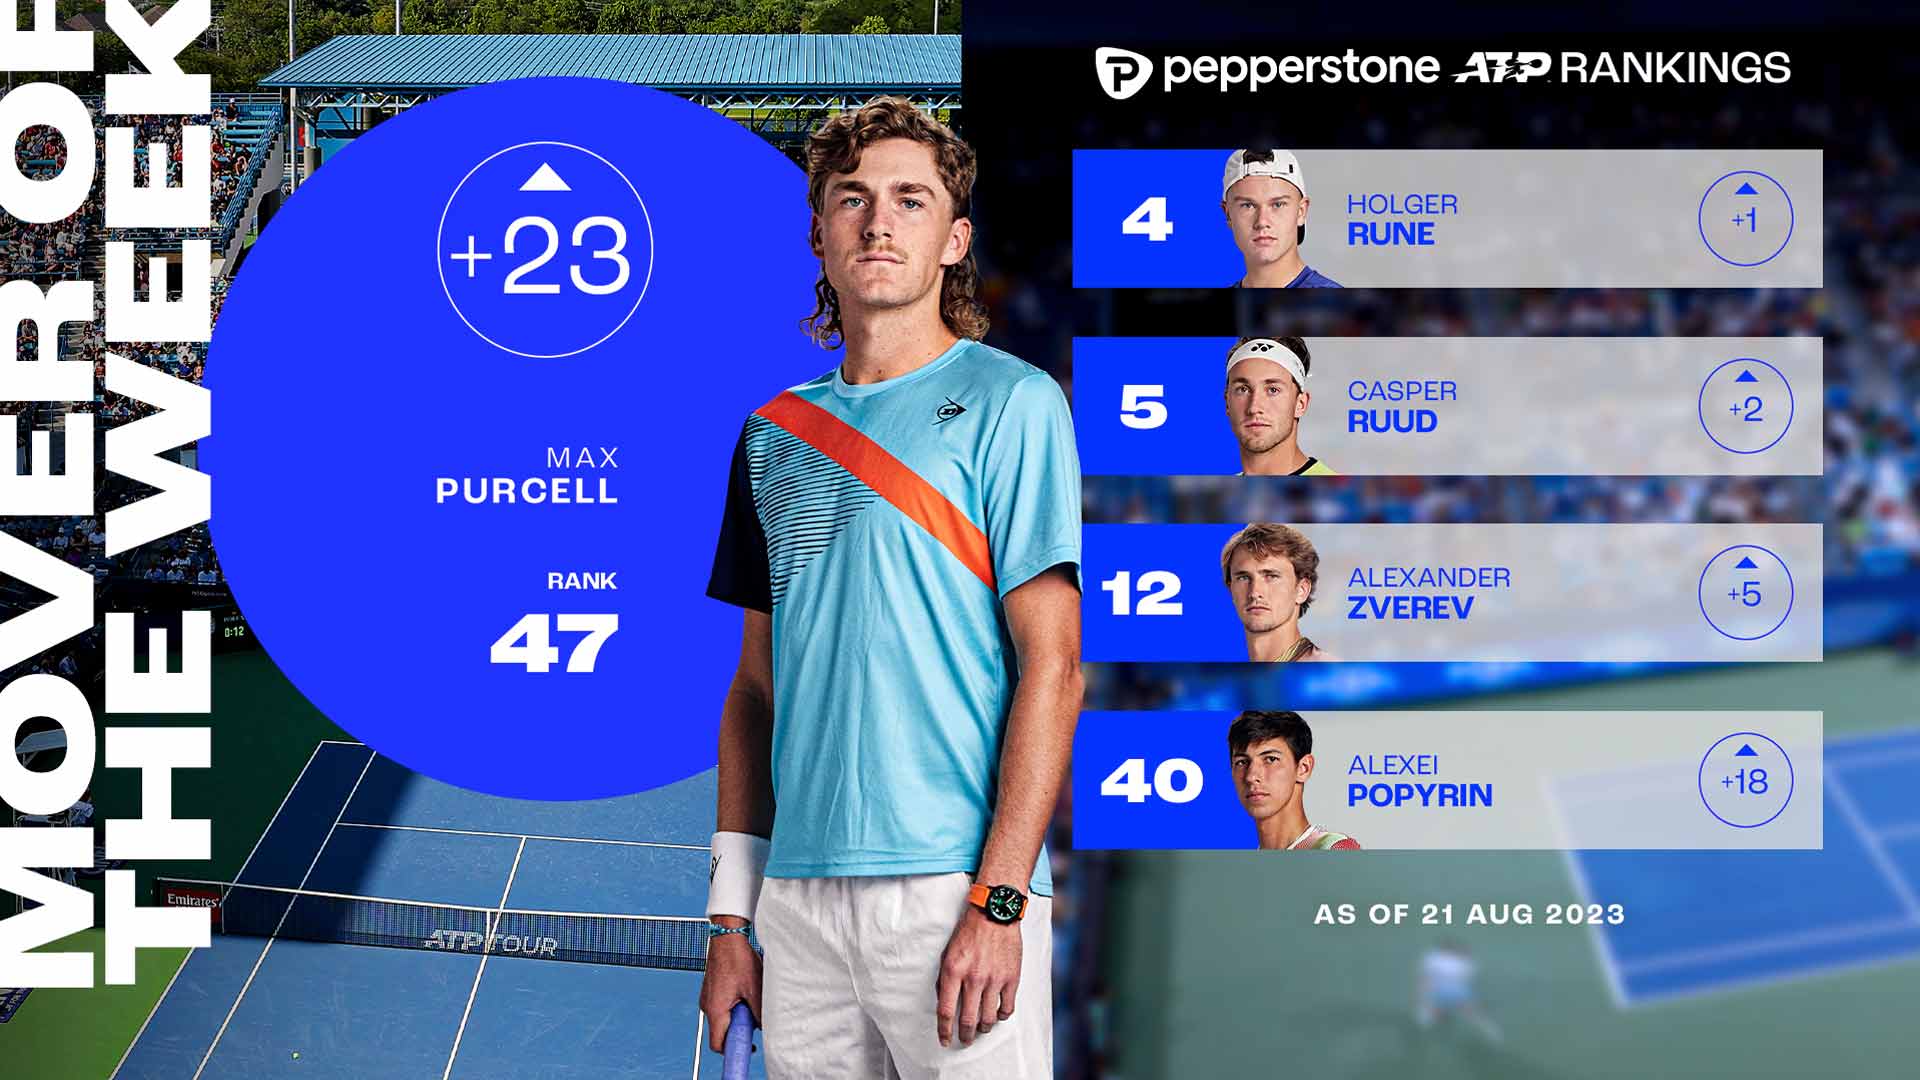 Tennis Channel - Major ranking moves this week on the ATP Tour📈